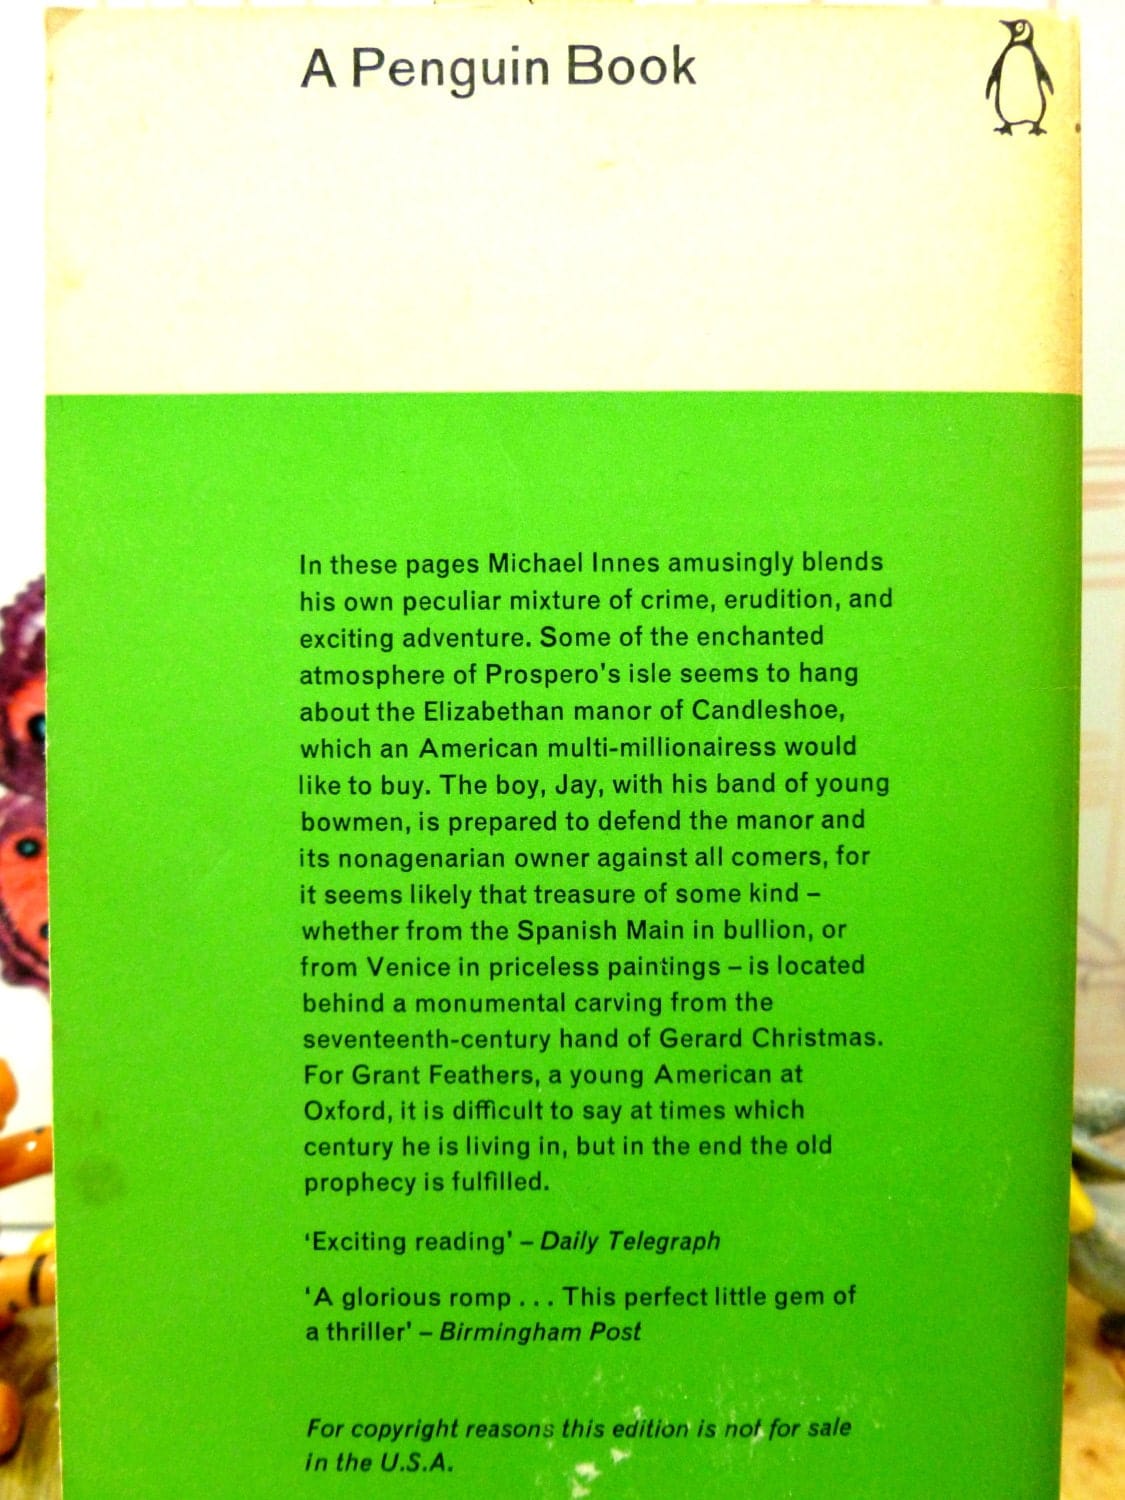 Back cover of Vintage Penguin Paperback Christmas at Candleshoe by Michael Innes First Edition showing blurb on a green ground. 